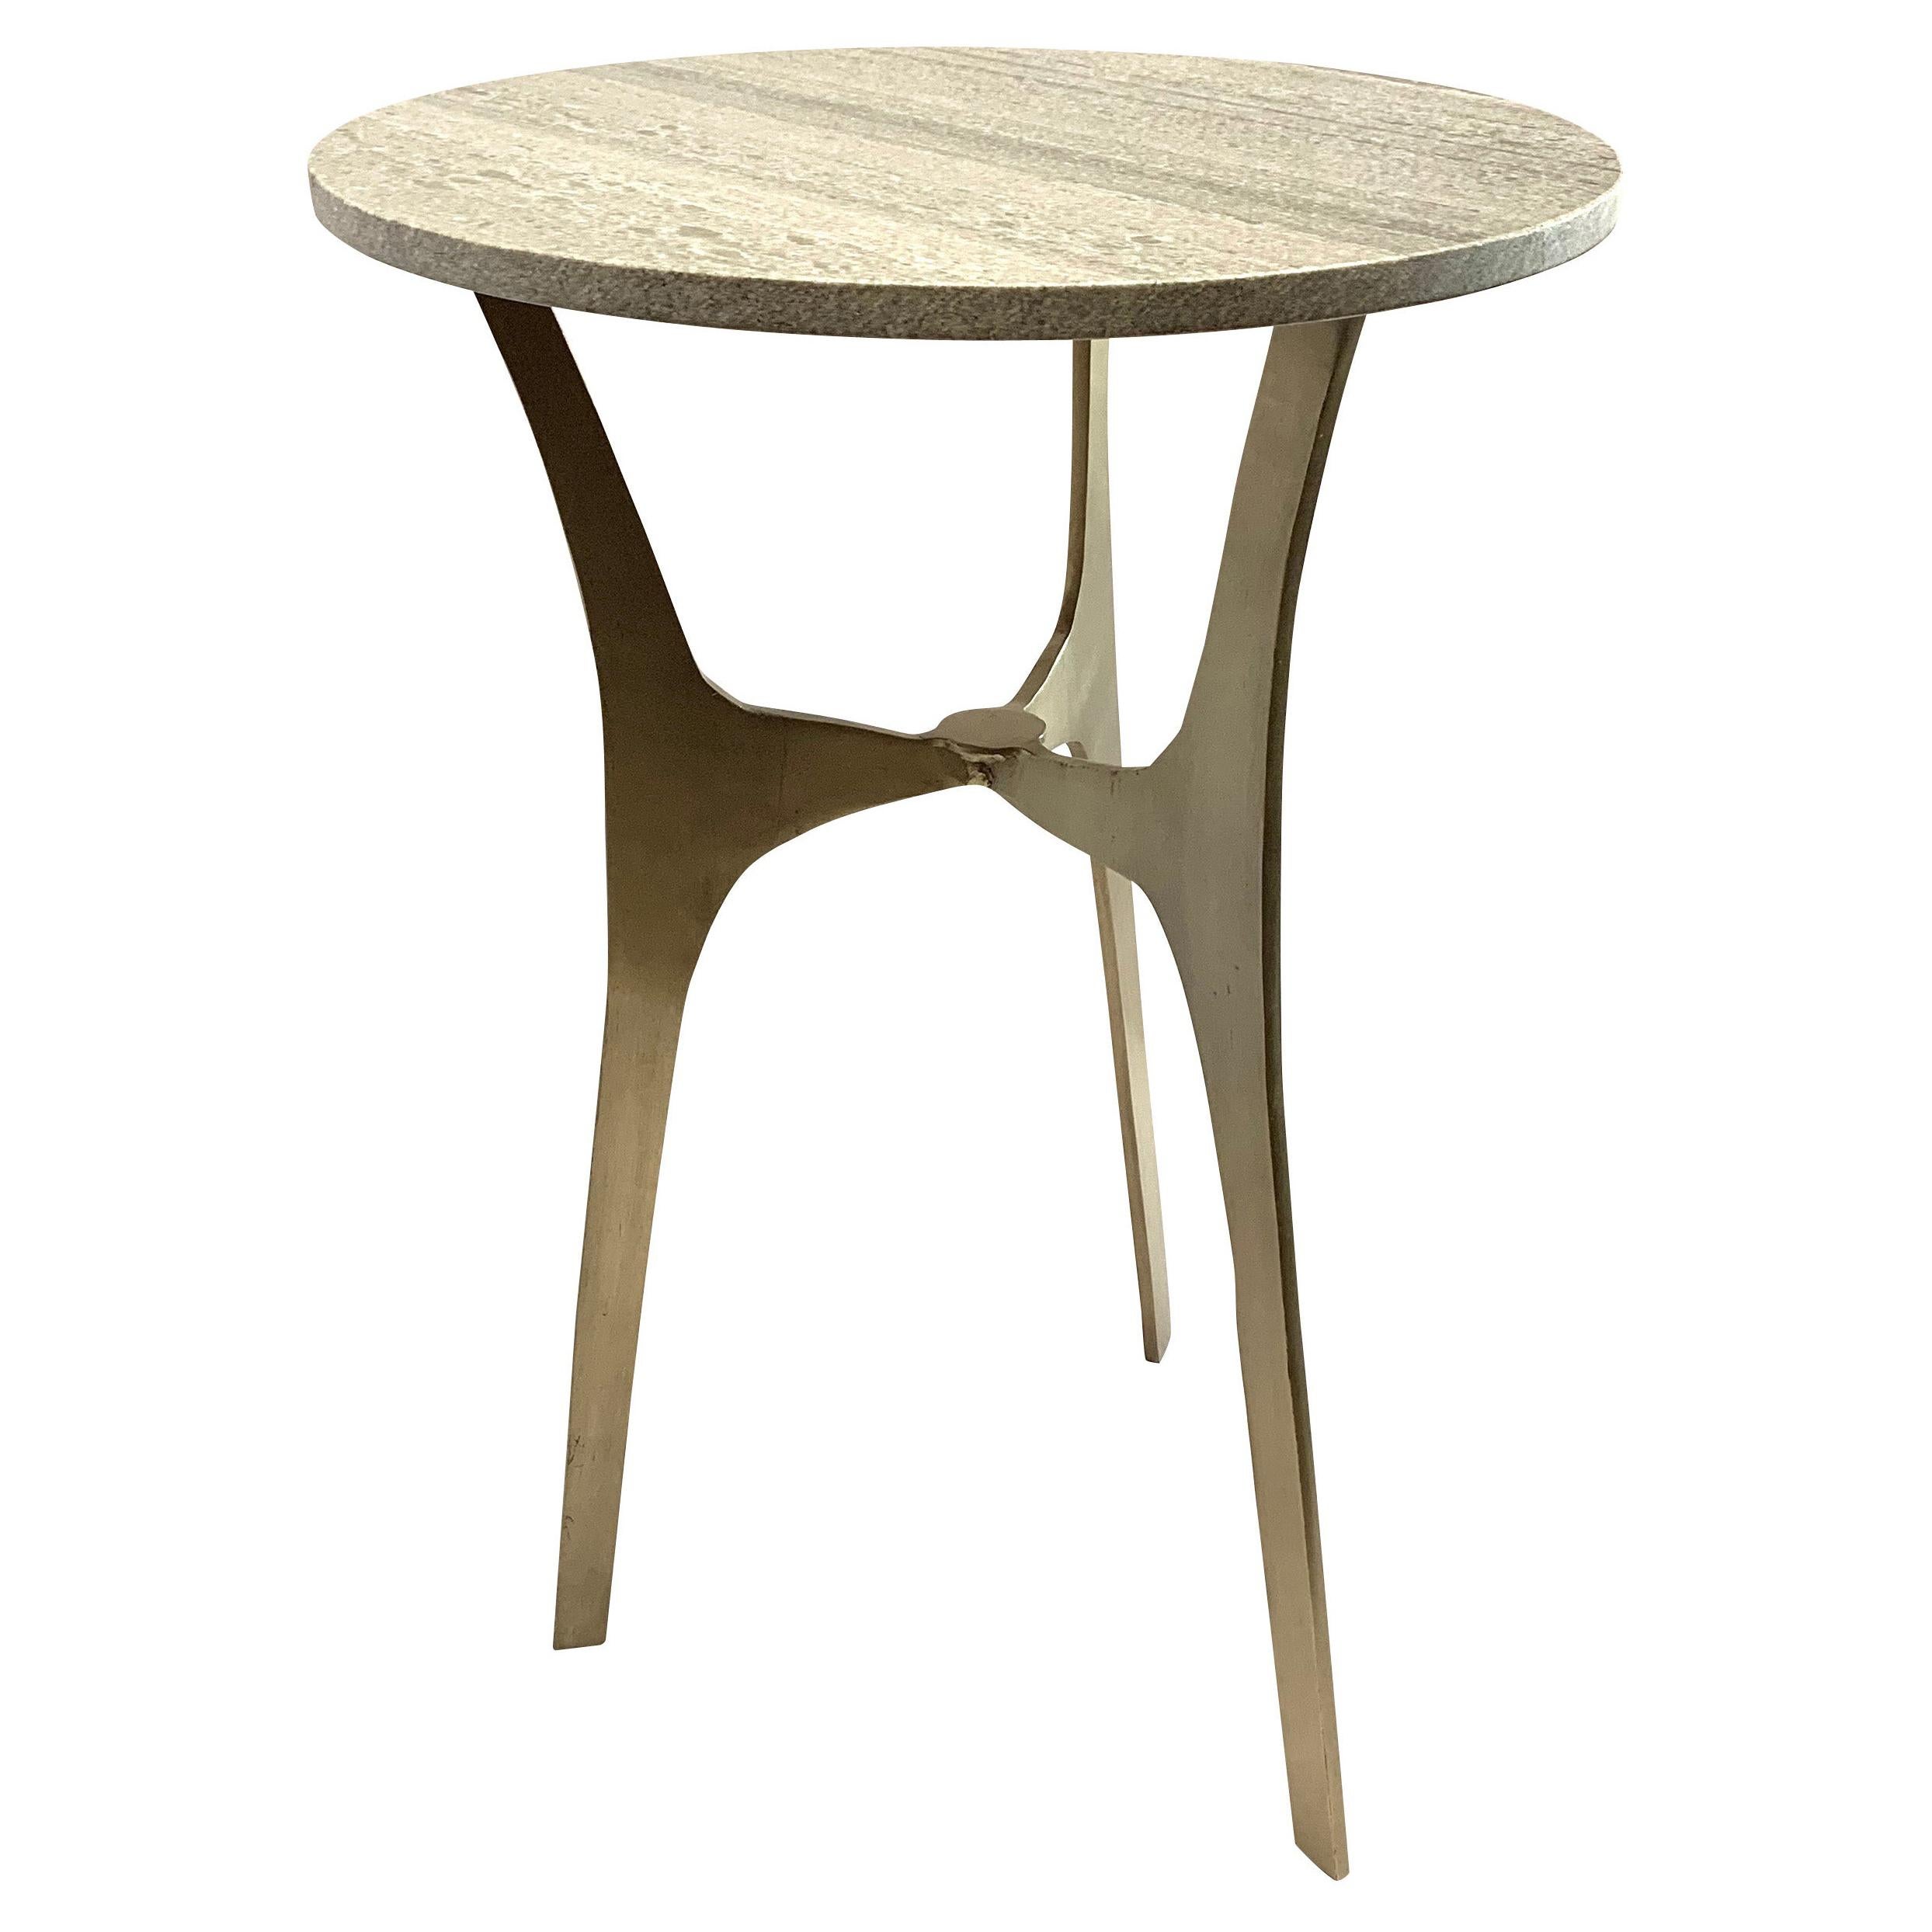 Grey Striped Round Marble Top, Tripod Leg Cocktail Table, China, Contemporary